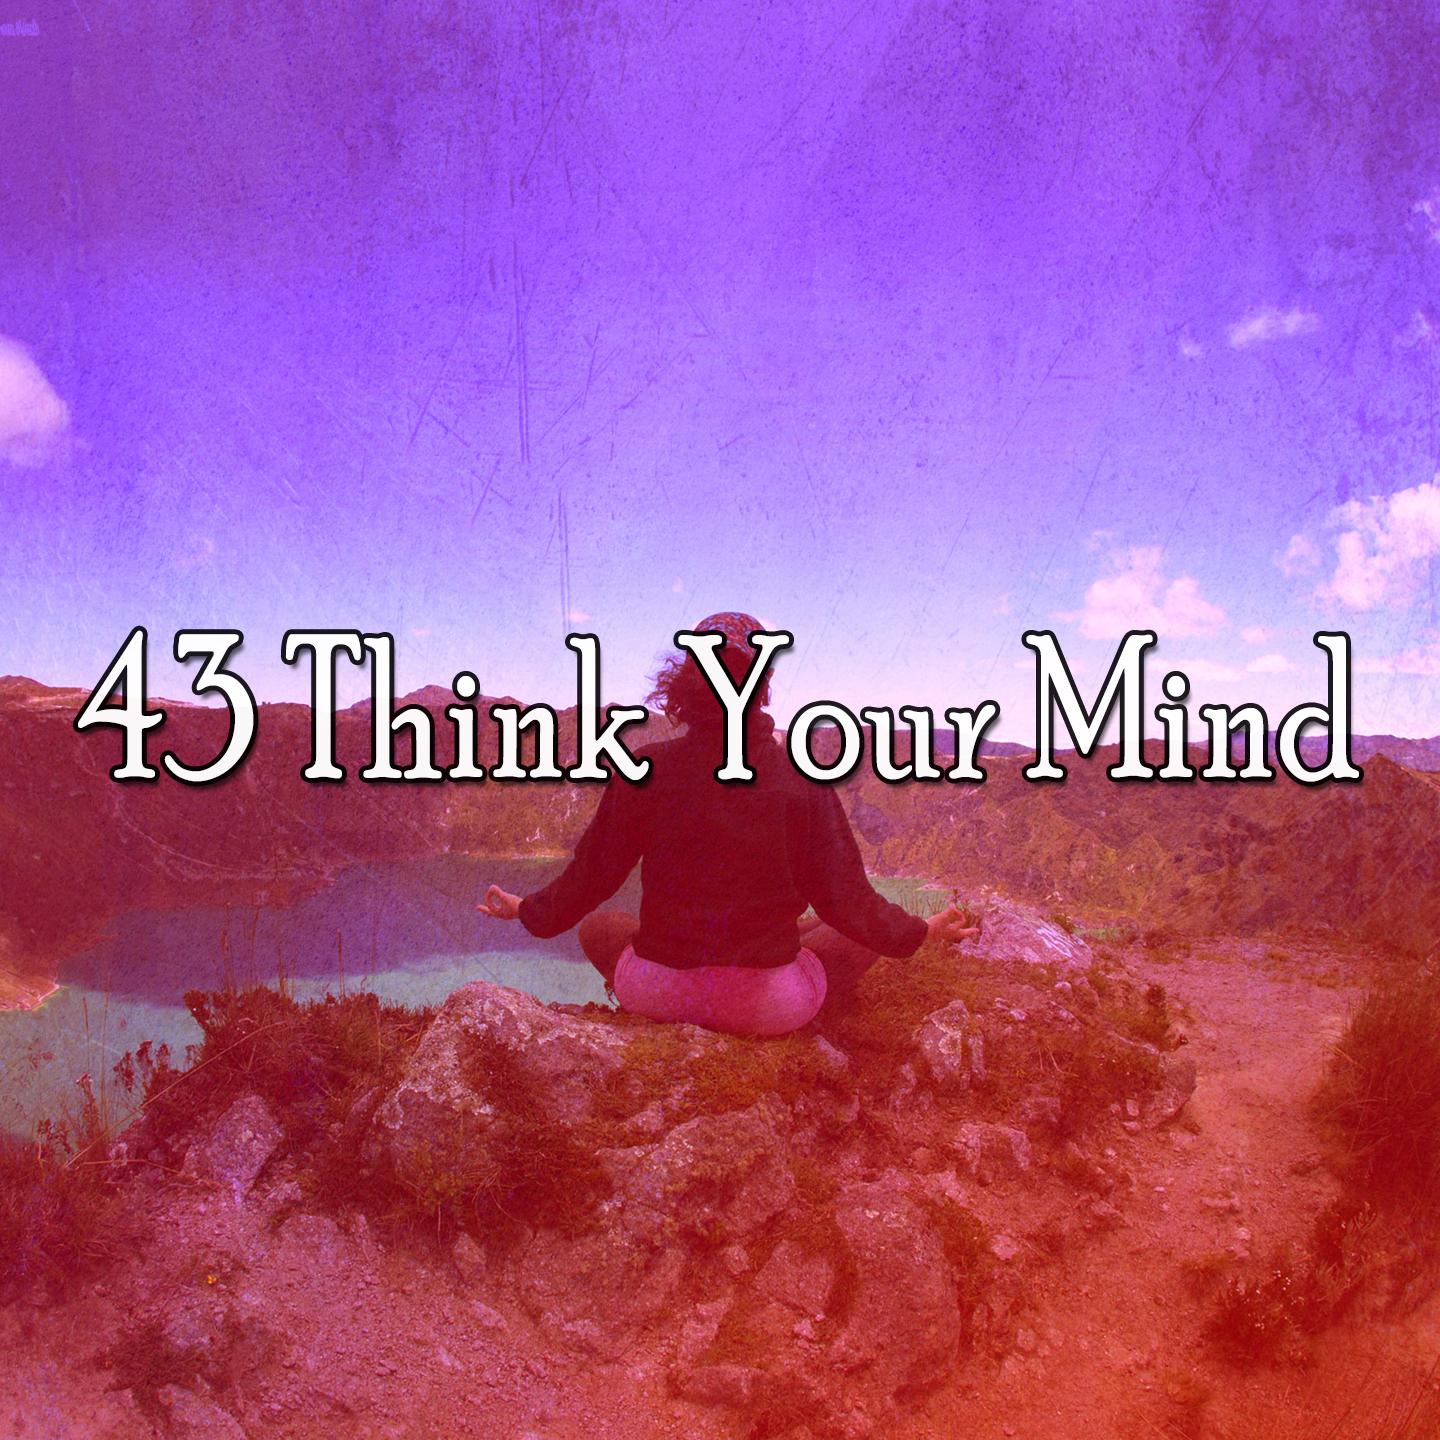 43 Think Your Mind